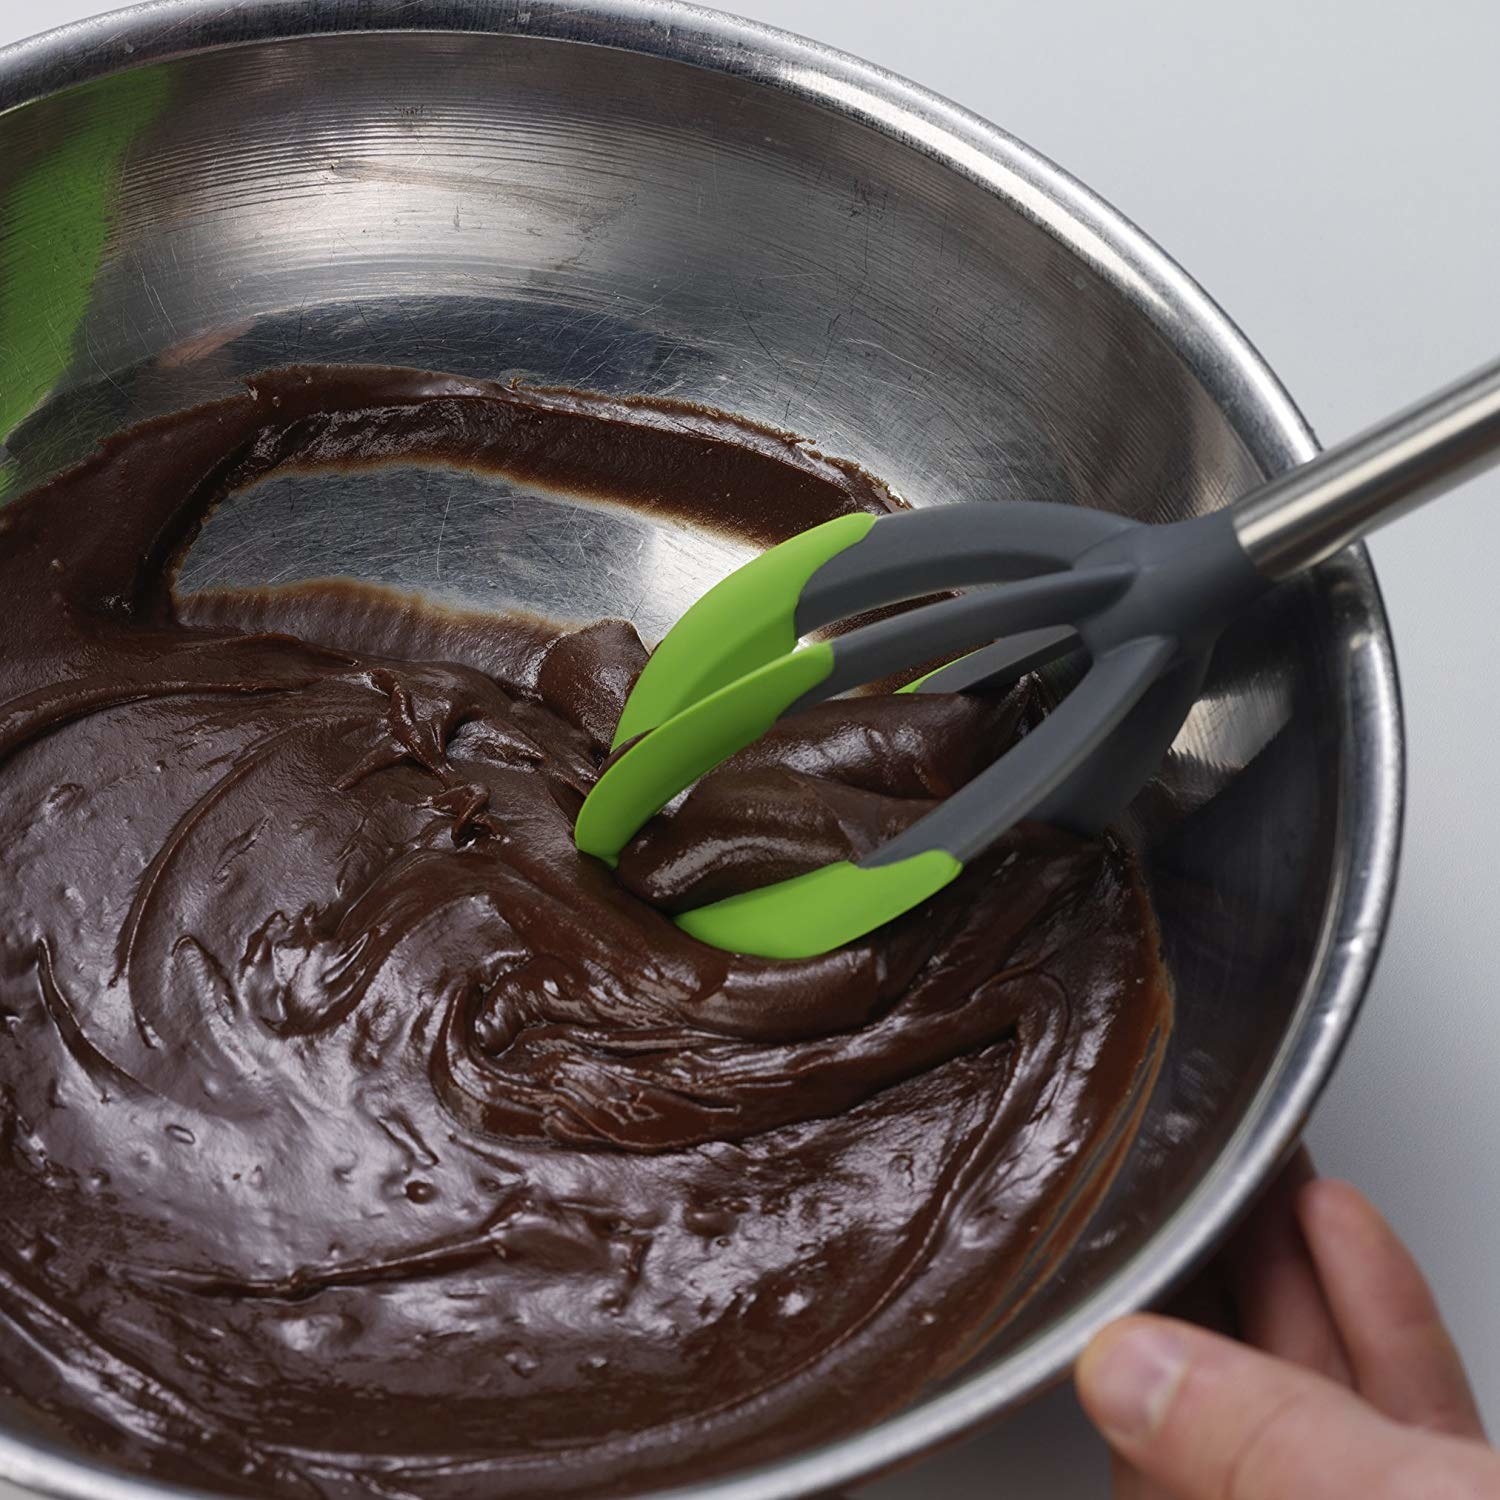 A silicone mixing spoon in a metal bowl filled with chocolate batter